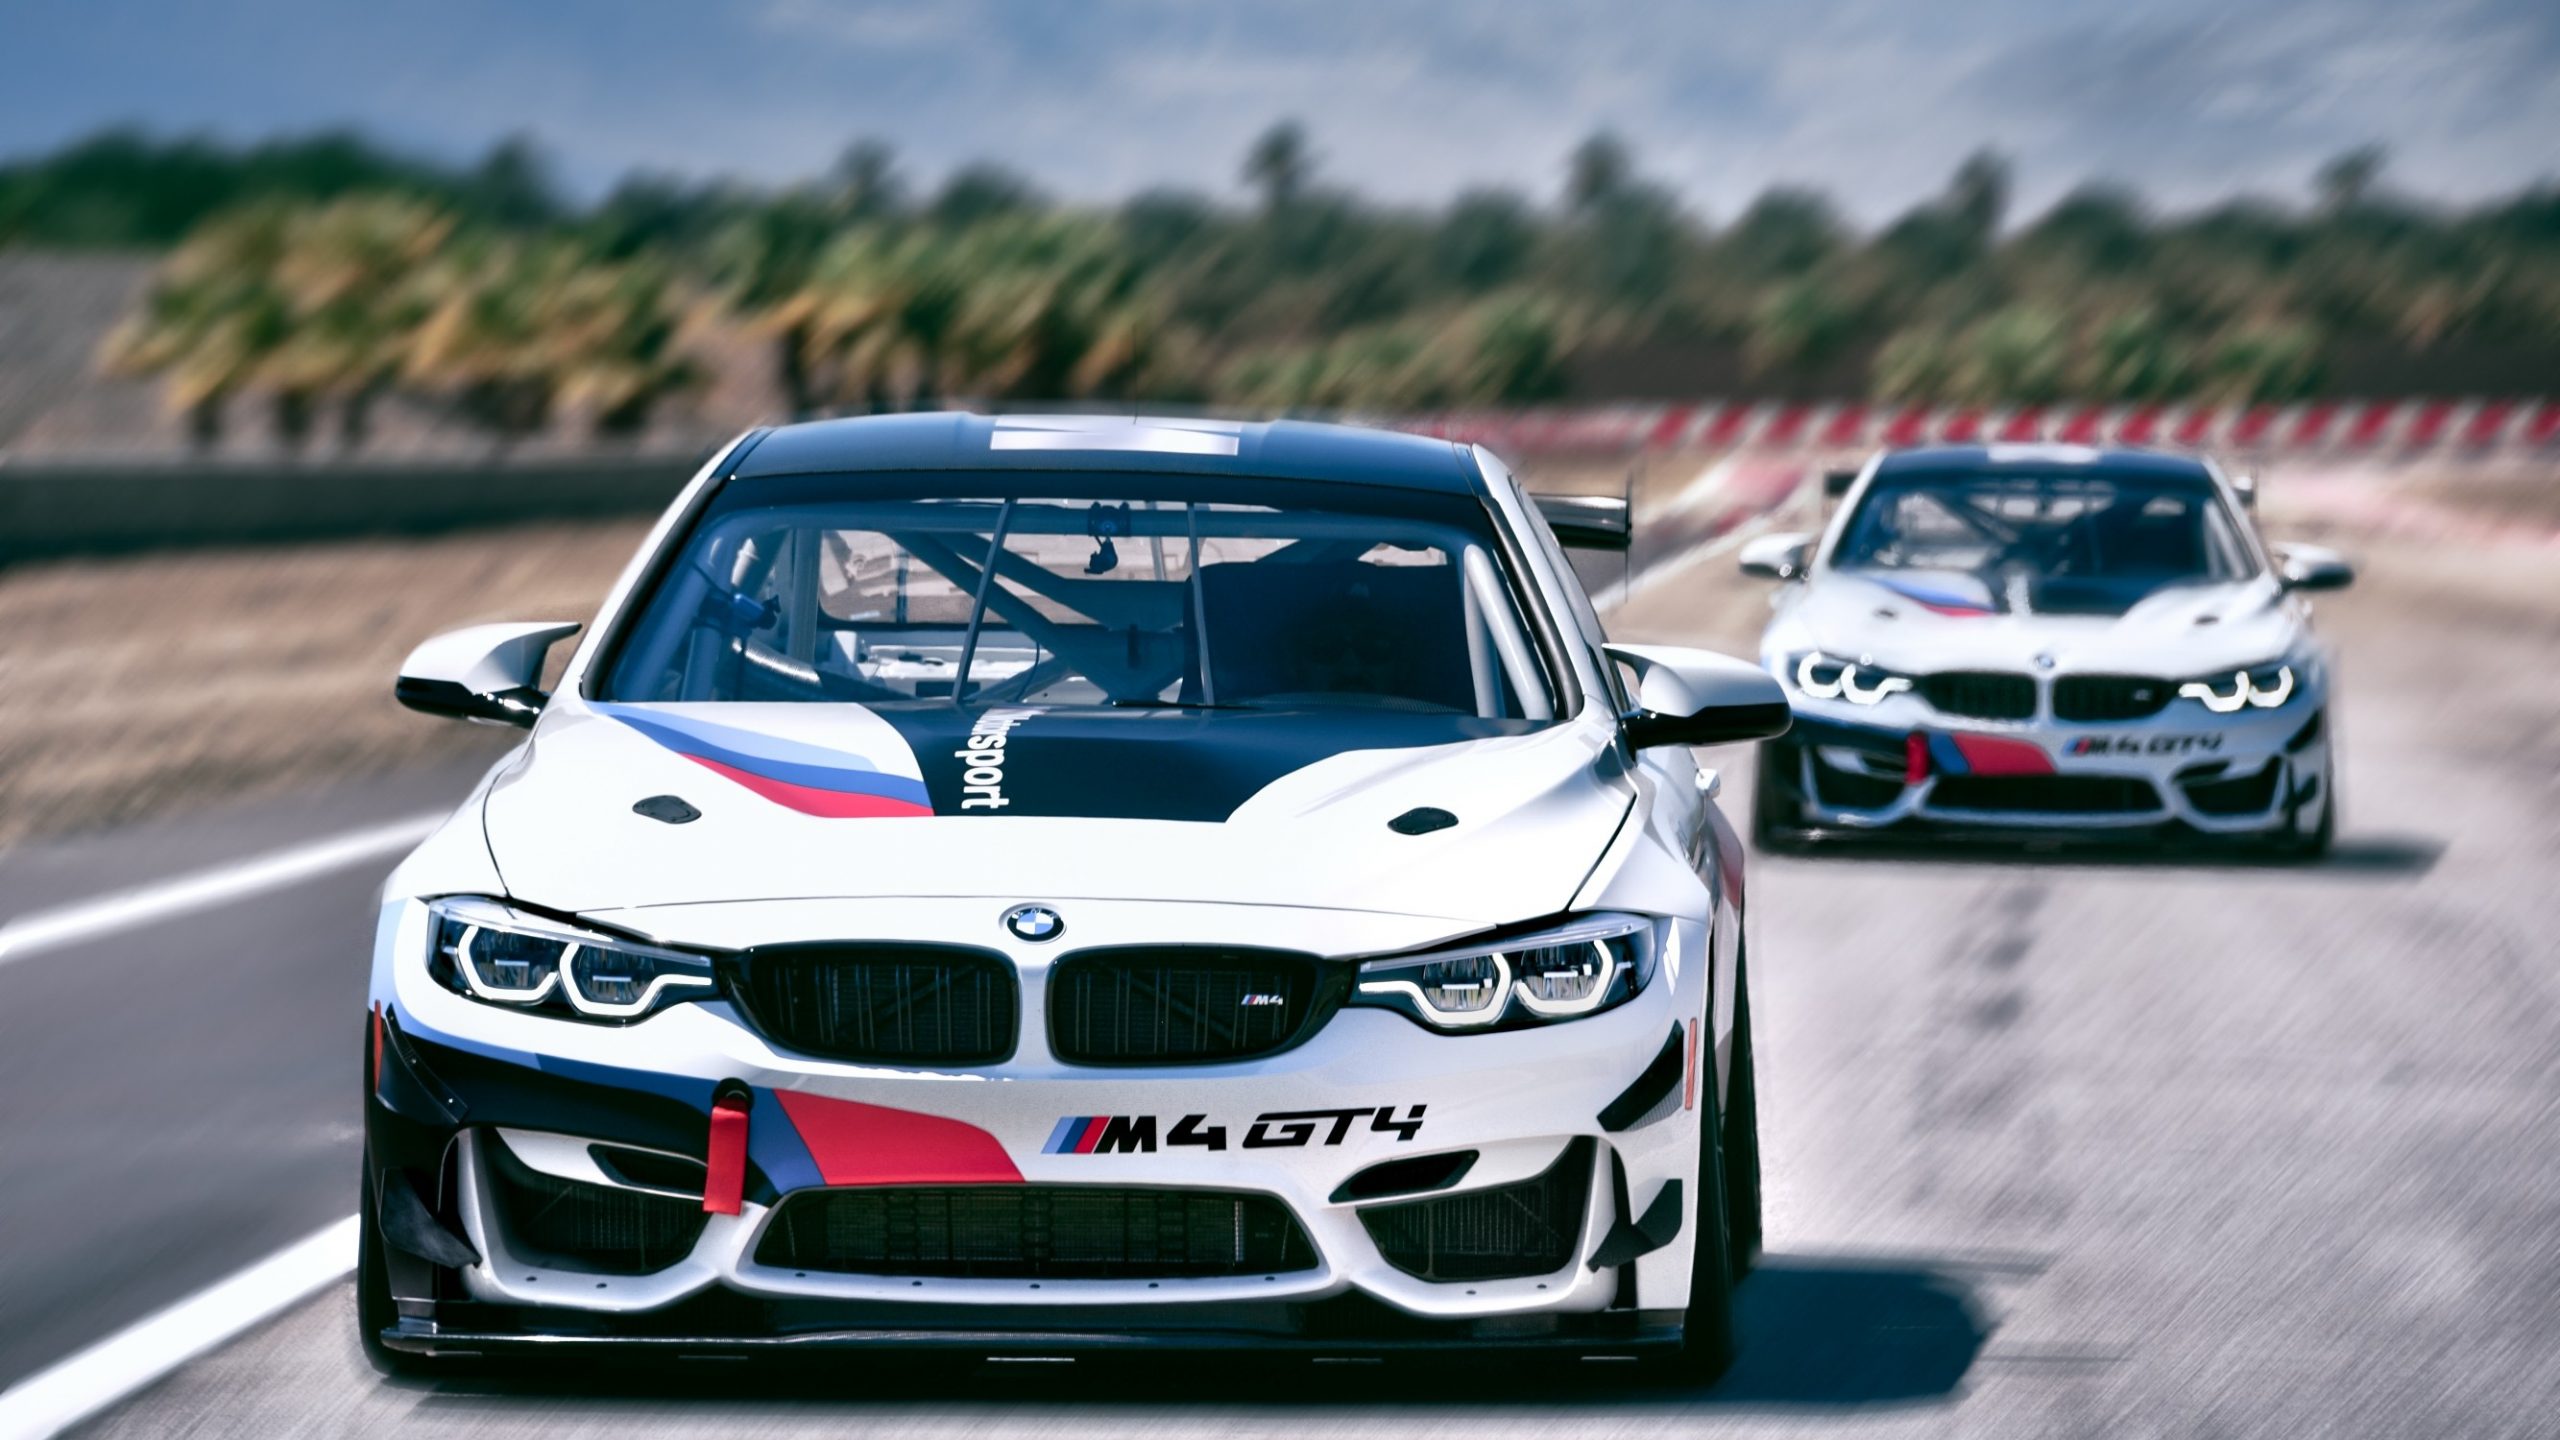 Bmw M4 Gt4 Wallpapers